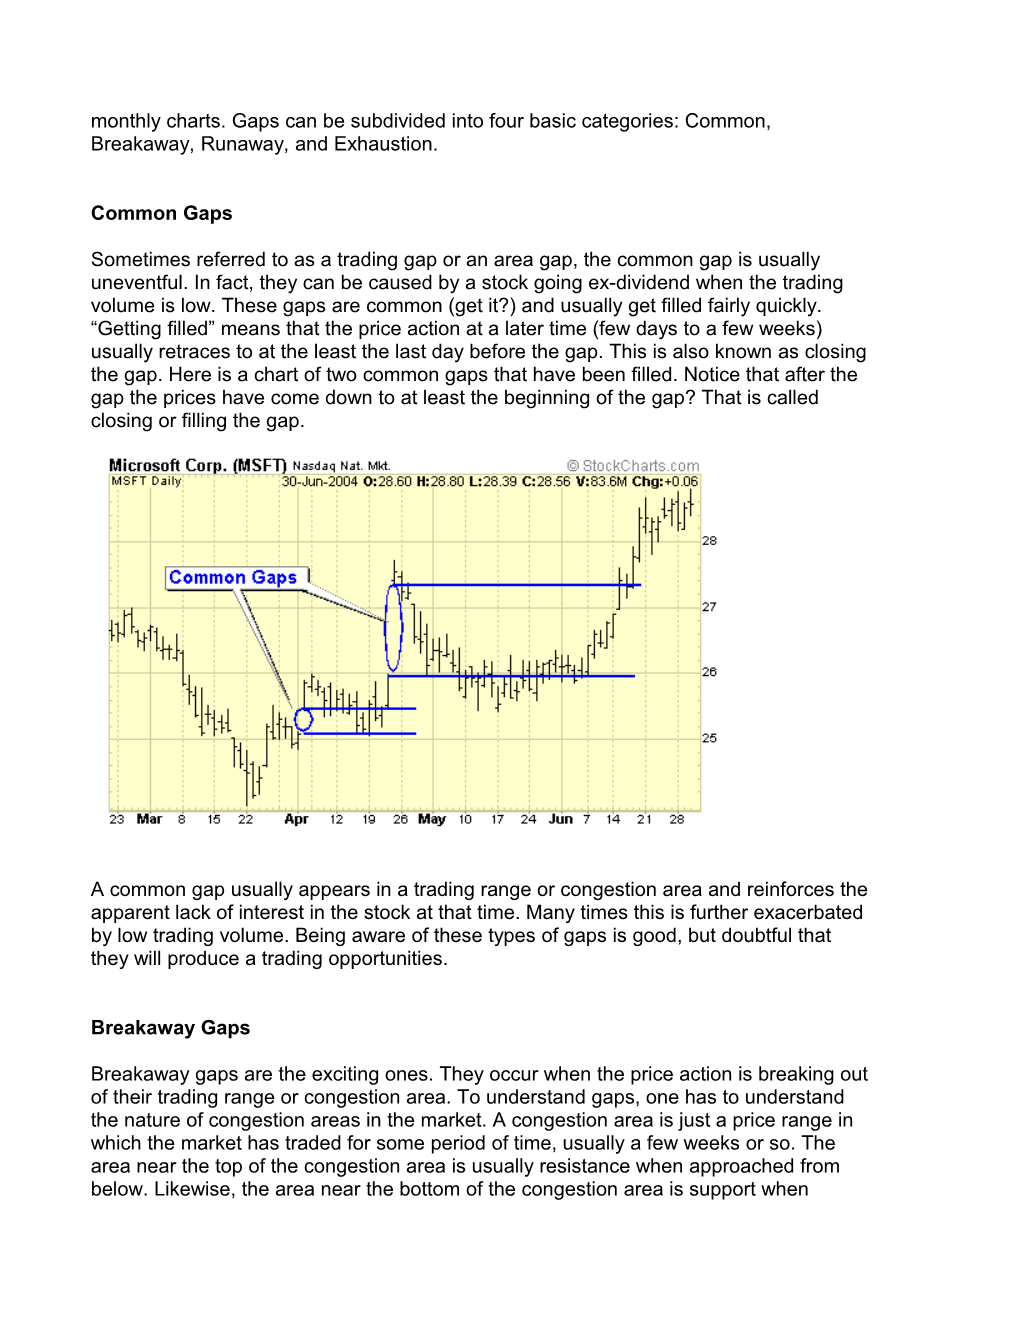 Have You Ever Wondered What Causes Gaps in Price Charts and What They Mean? Well, You Came